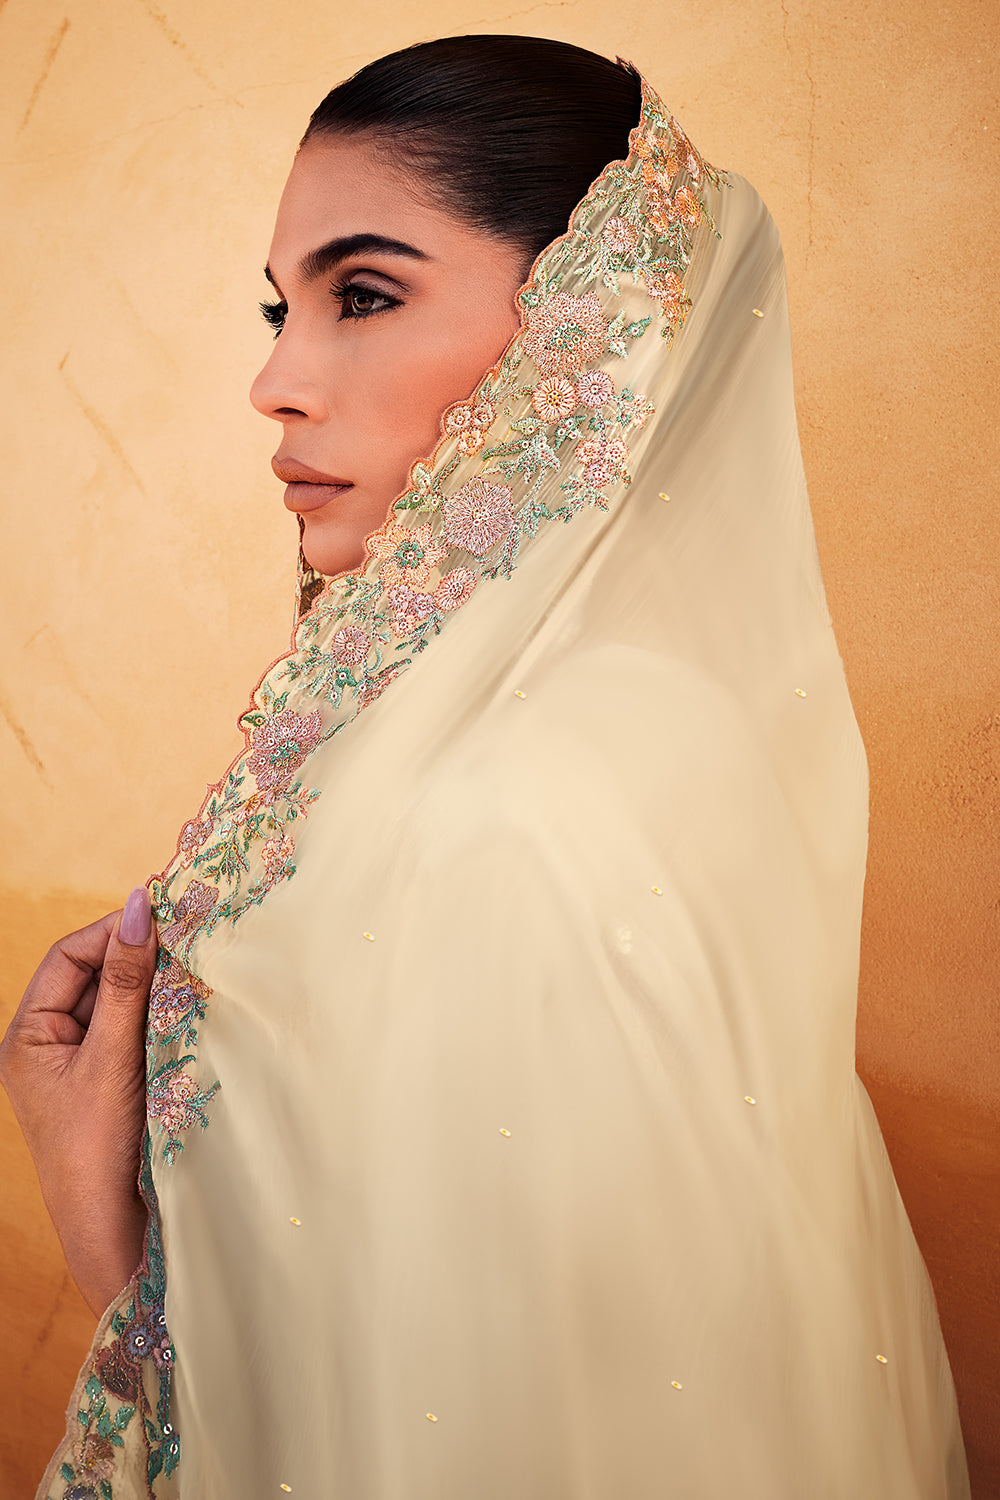 Cream Color Embroidered Organza Unstitched Suit Material